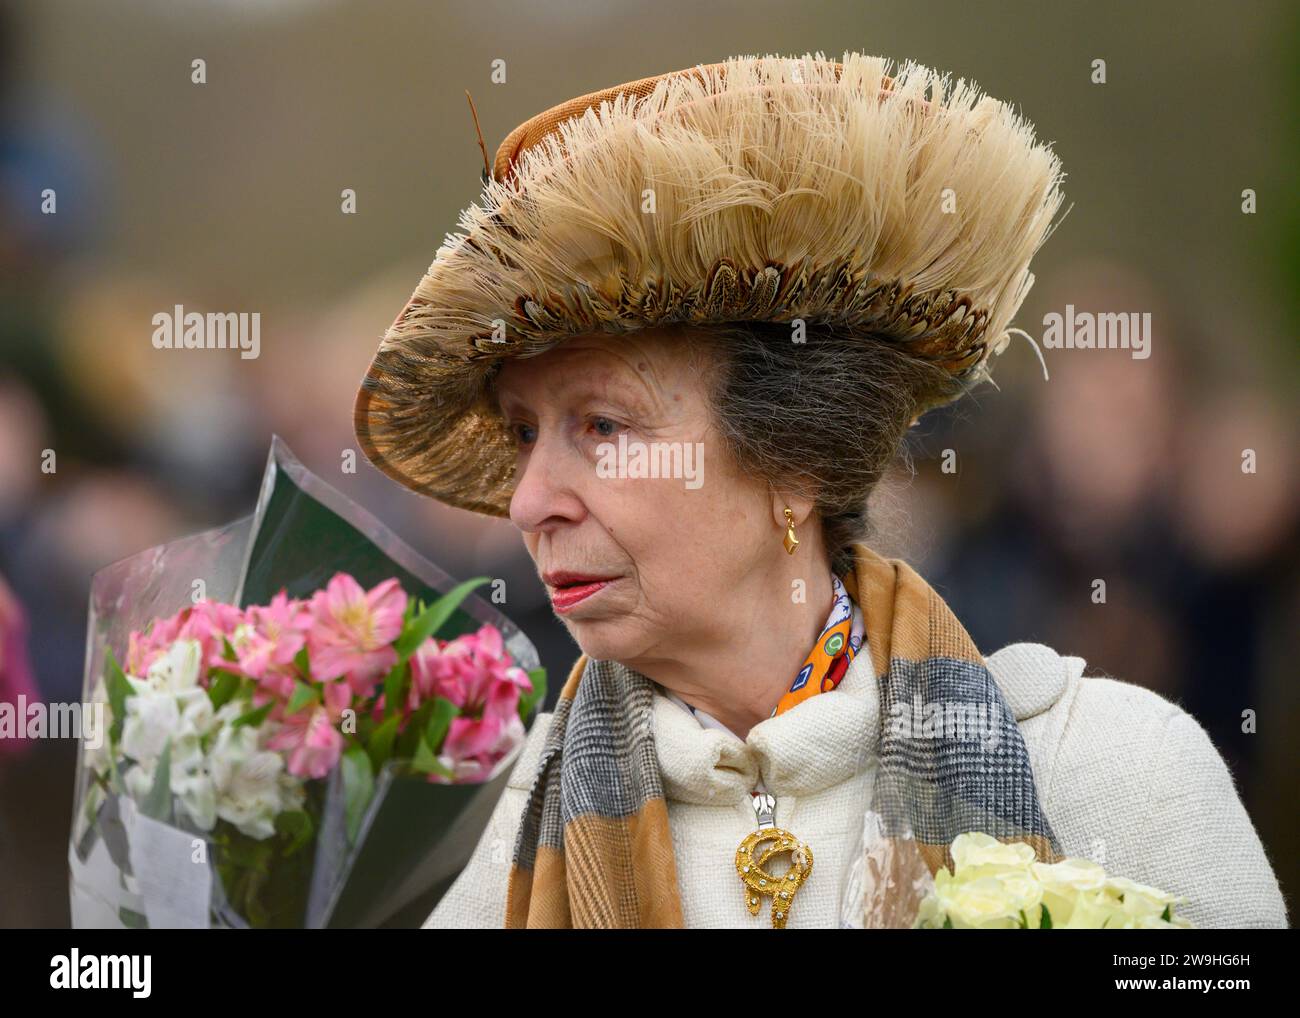 The Princess Royal greets well-wishers after attending the Christmas service at St Mary Magdalene Church, Sandringham. December 25, 2023 Stock Photo